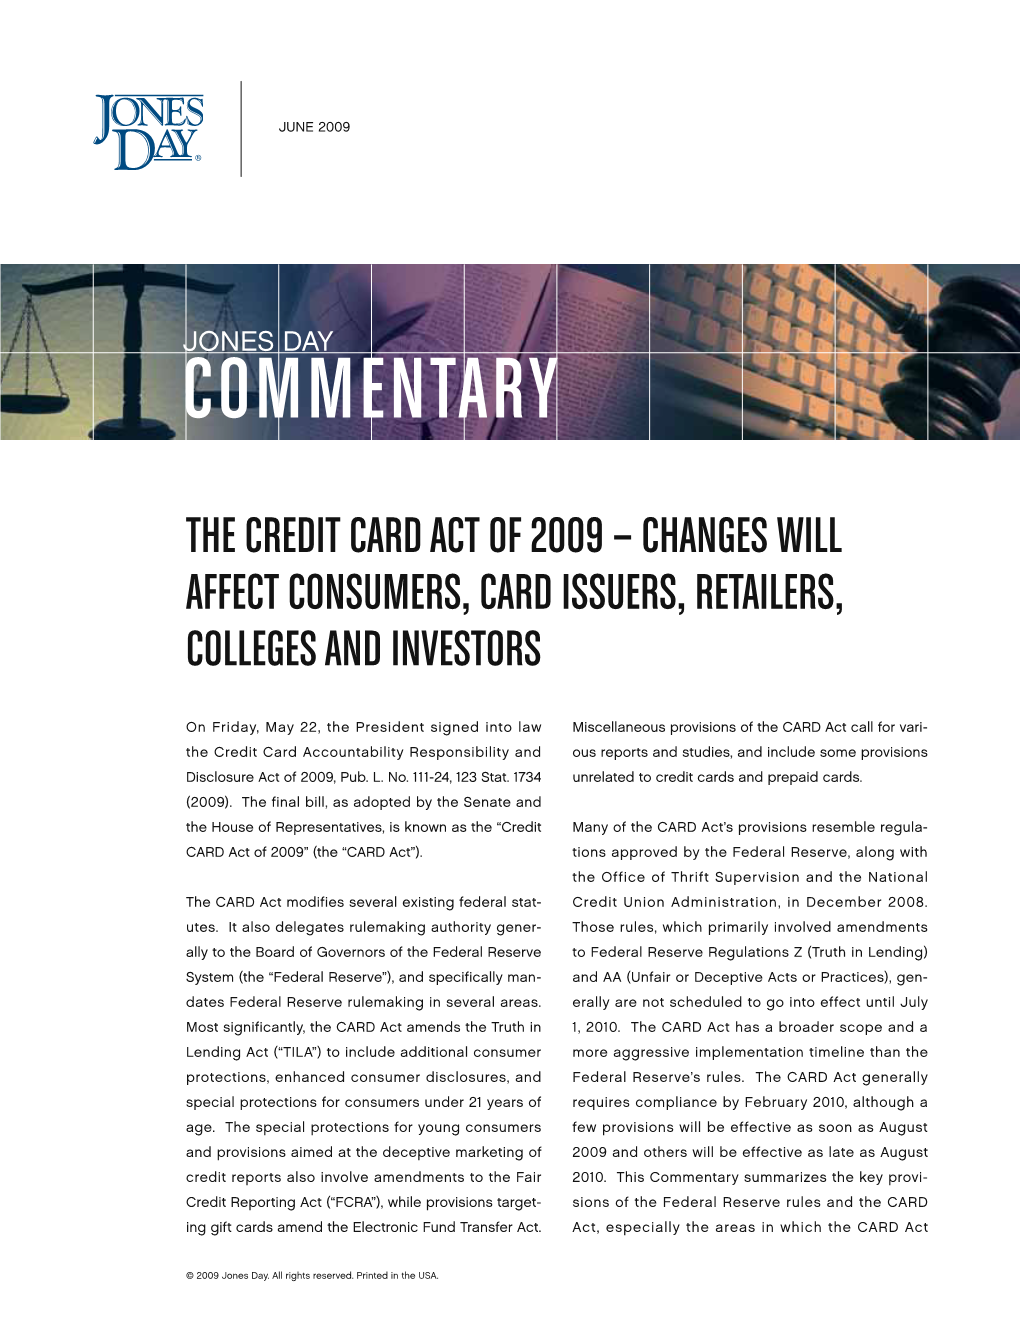 Credit CARD Act of 2009 — Changes Will Affect Consumers, Card Issuers, Retailers, Colleges and Investors